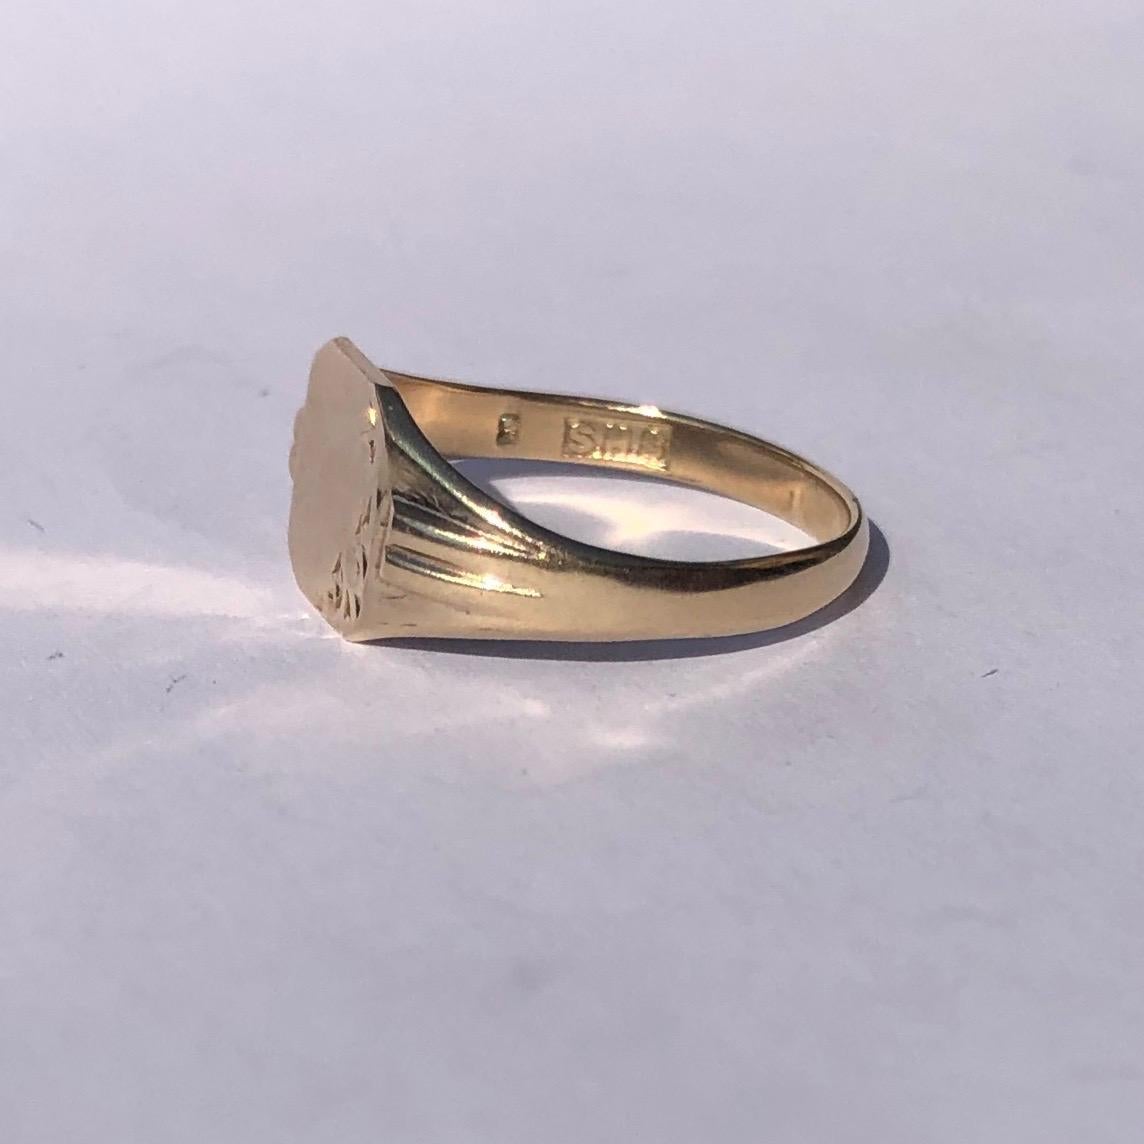 This sweet signet is modelled in 9ct gold and has a square face with half of it gently moulded with scroll detail. Made in London, England. 

Ring Size: O or 7
Face Dimensions: 8.5x8.5mm 

Weight: 2g